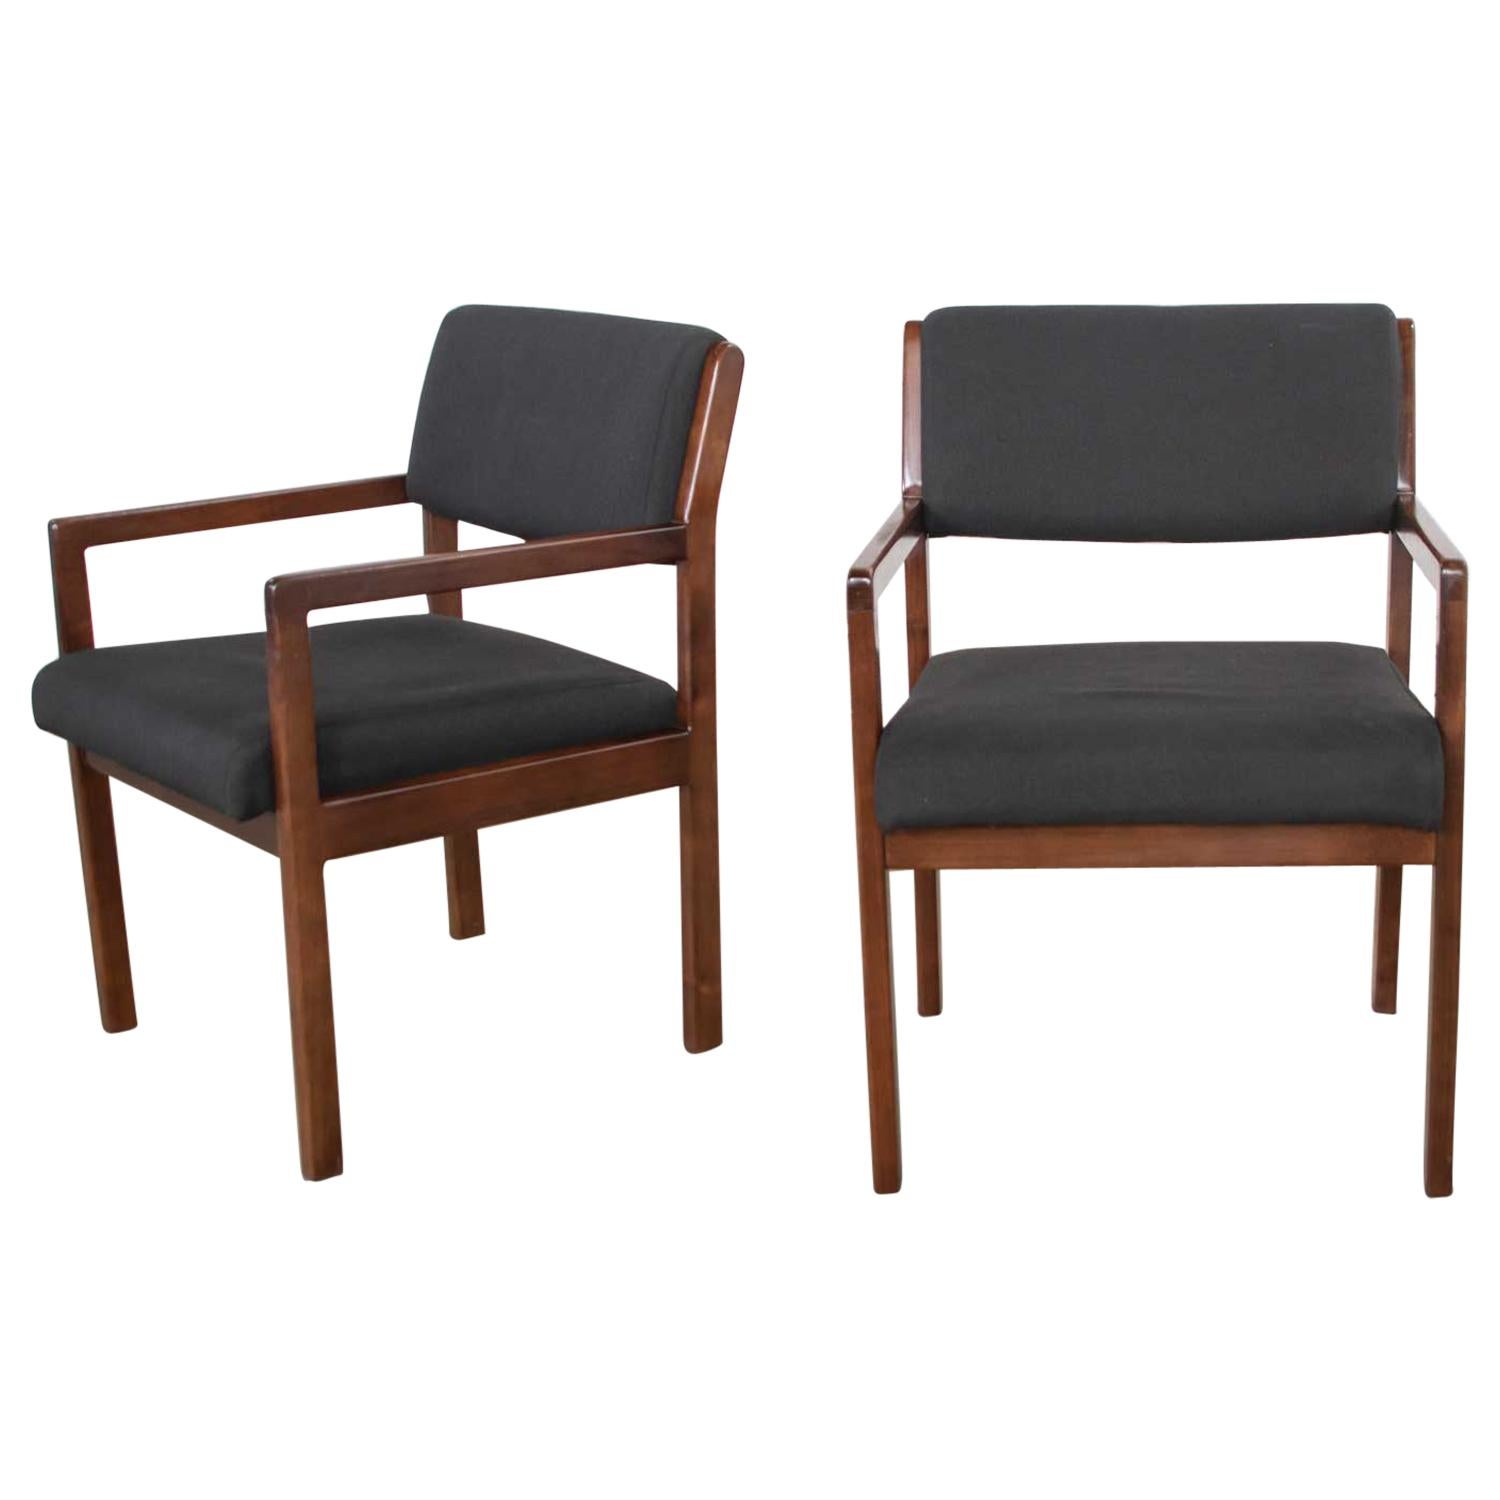 Modern Pair of Black and Walnut Tone Wood Accent or Dining Armchairs by Haworth For Sale